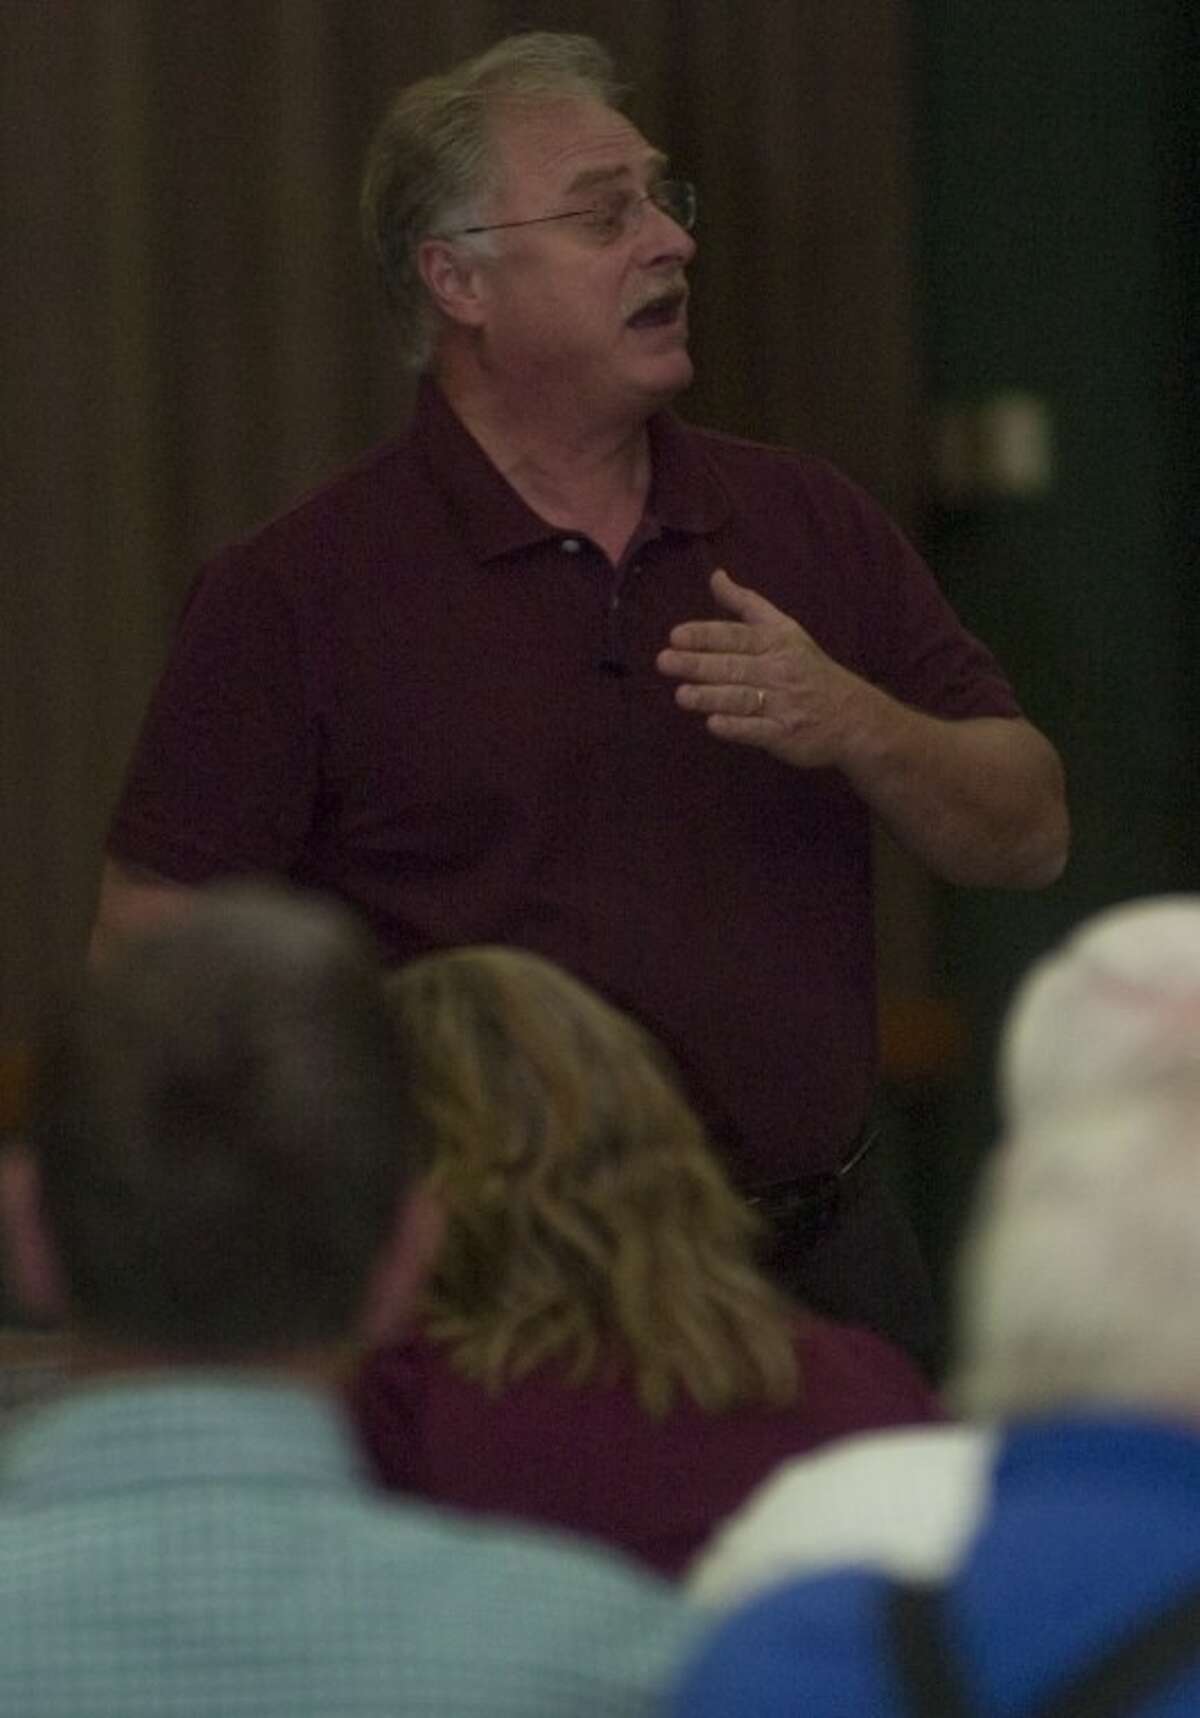 Jimmy Meeks, 30 years law enforecement retired and ordained minister, talks about why there is a need for safety in the church during a seminar Monday at the Midland Center. Photo by Tim Fischer/Midland Reporter-Telegram